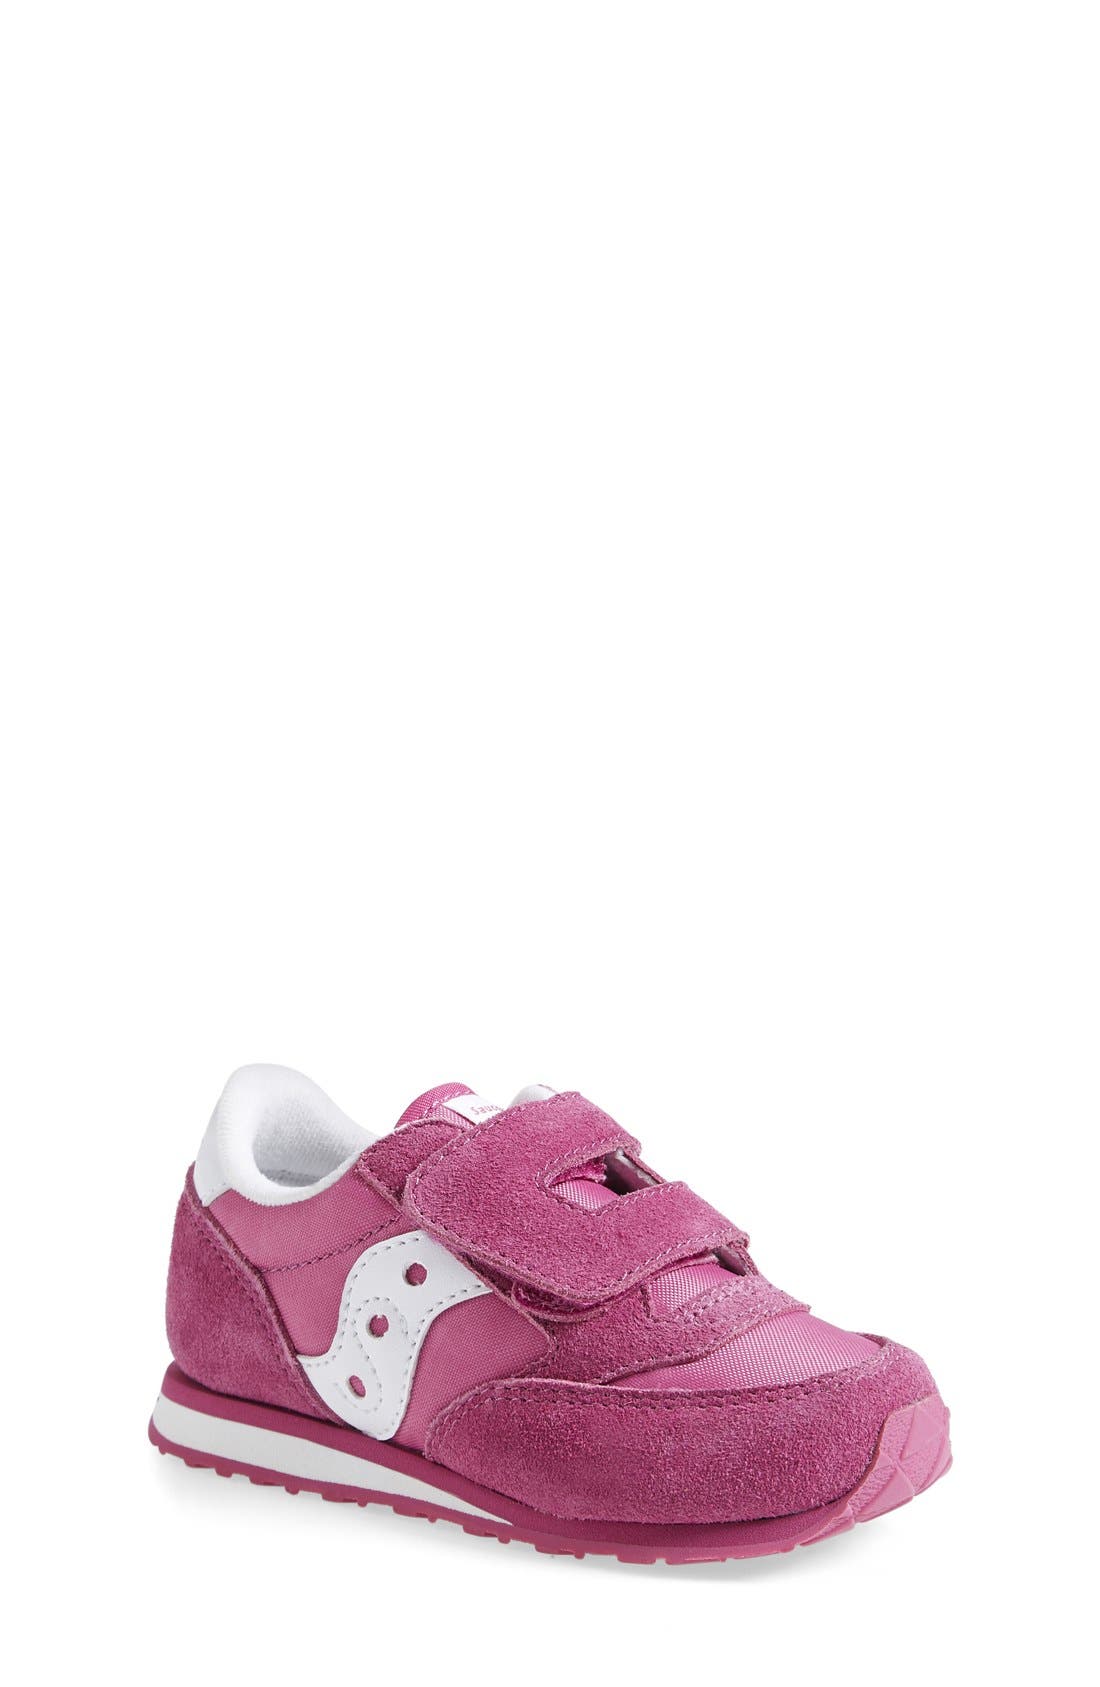 saucony grid 4000 womens pink